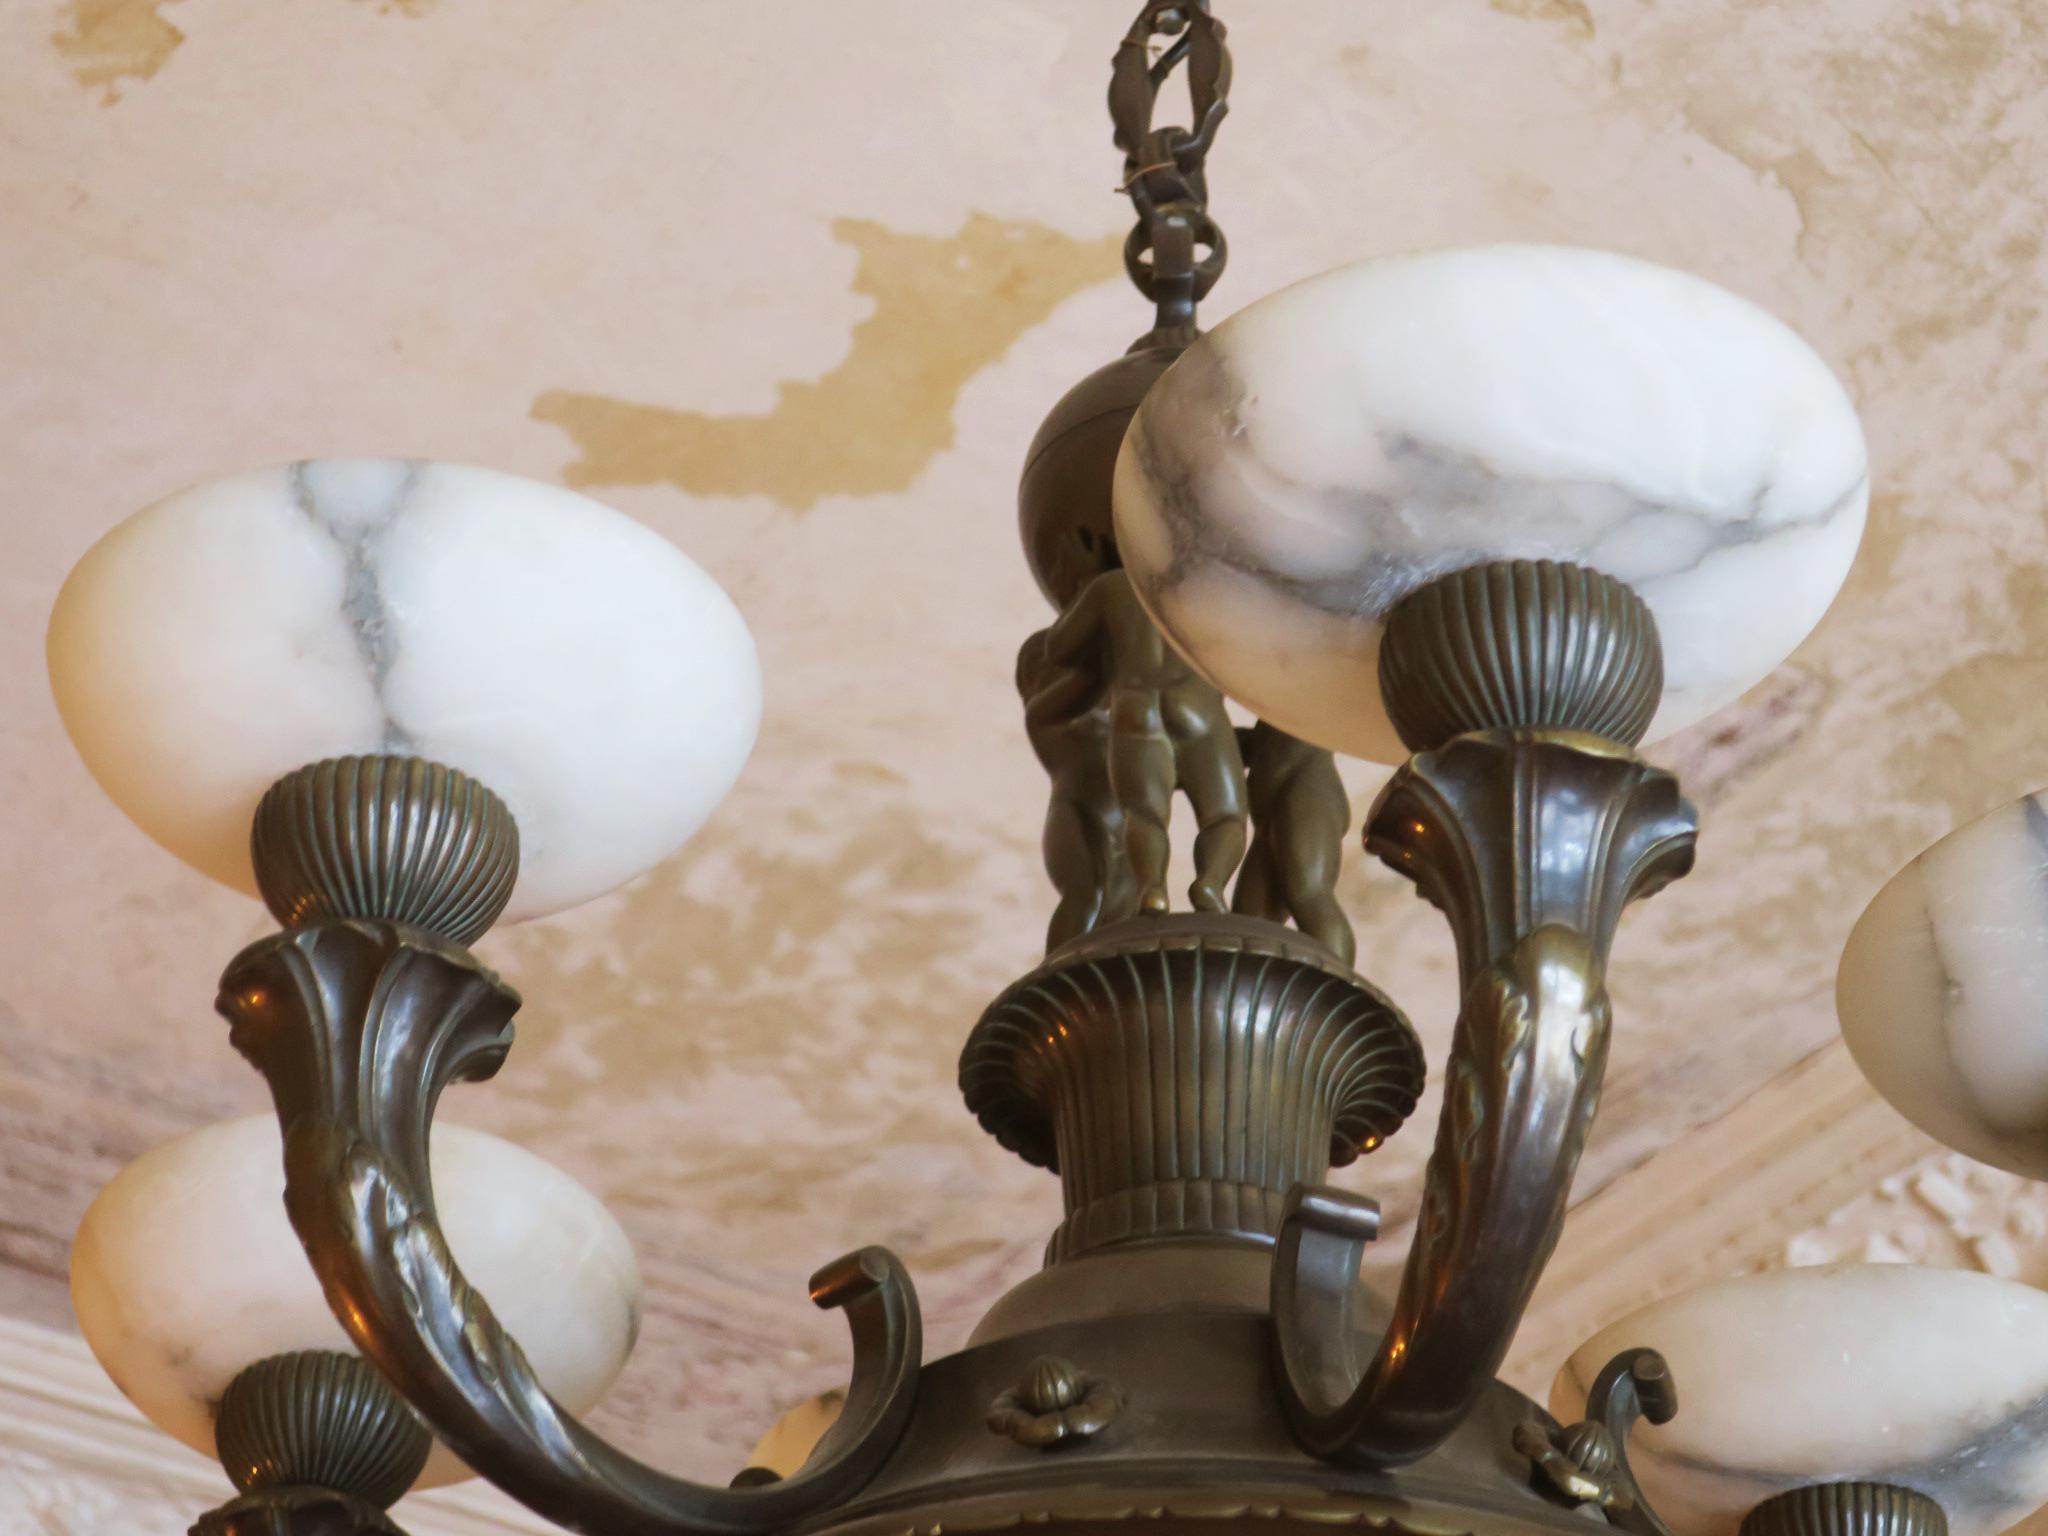 Impressive antique patinated bronze six-light chandelier with alabaster shades. The lamp features cherub figures.
Dates from about 1910-1920.
Very good vintage condition with minor signs of age and use.